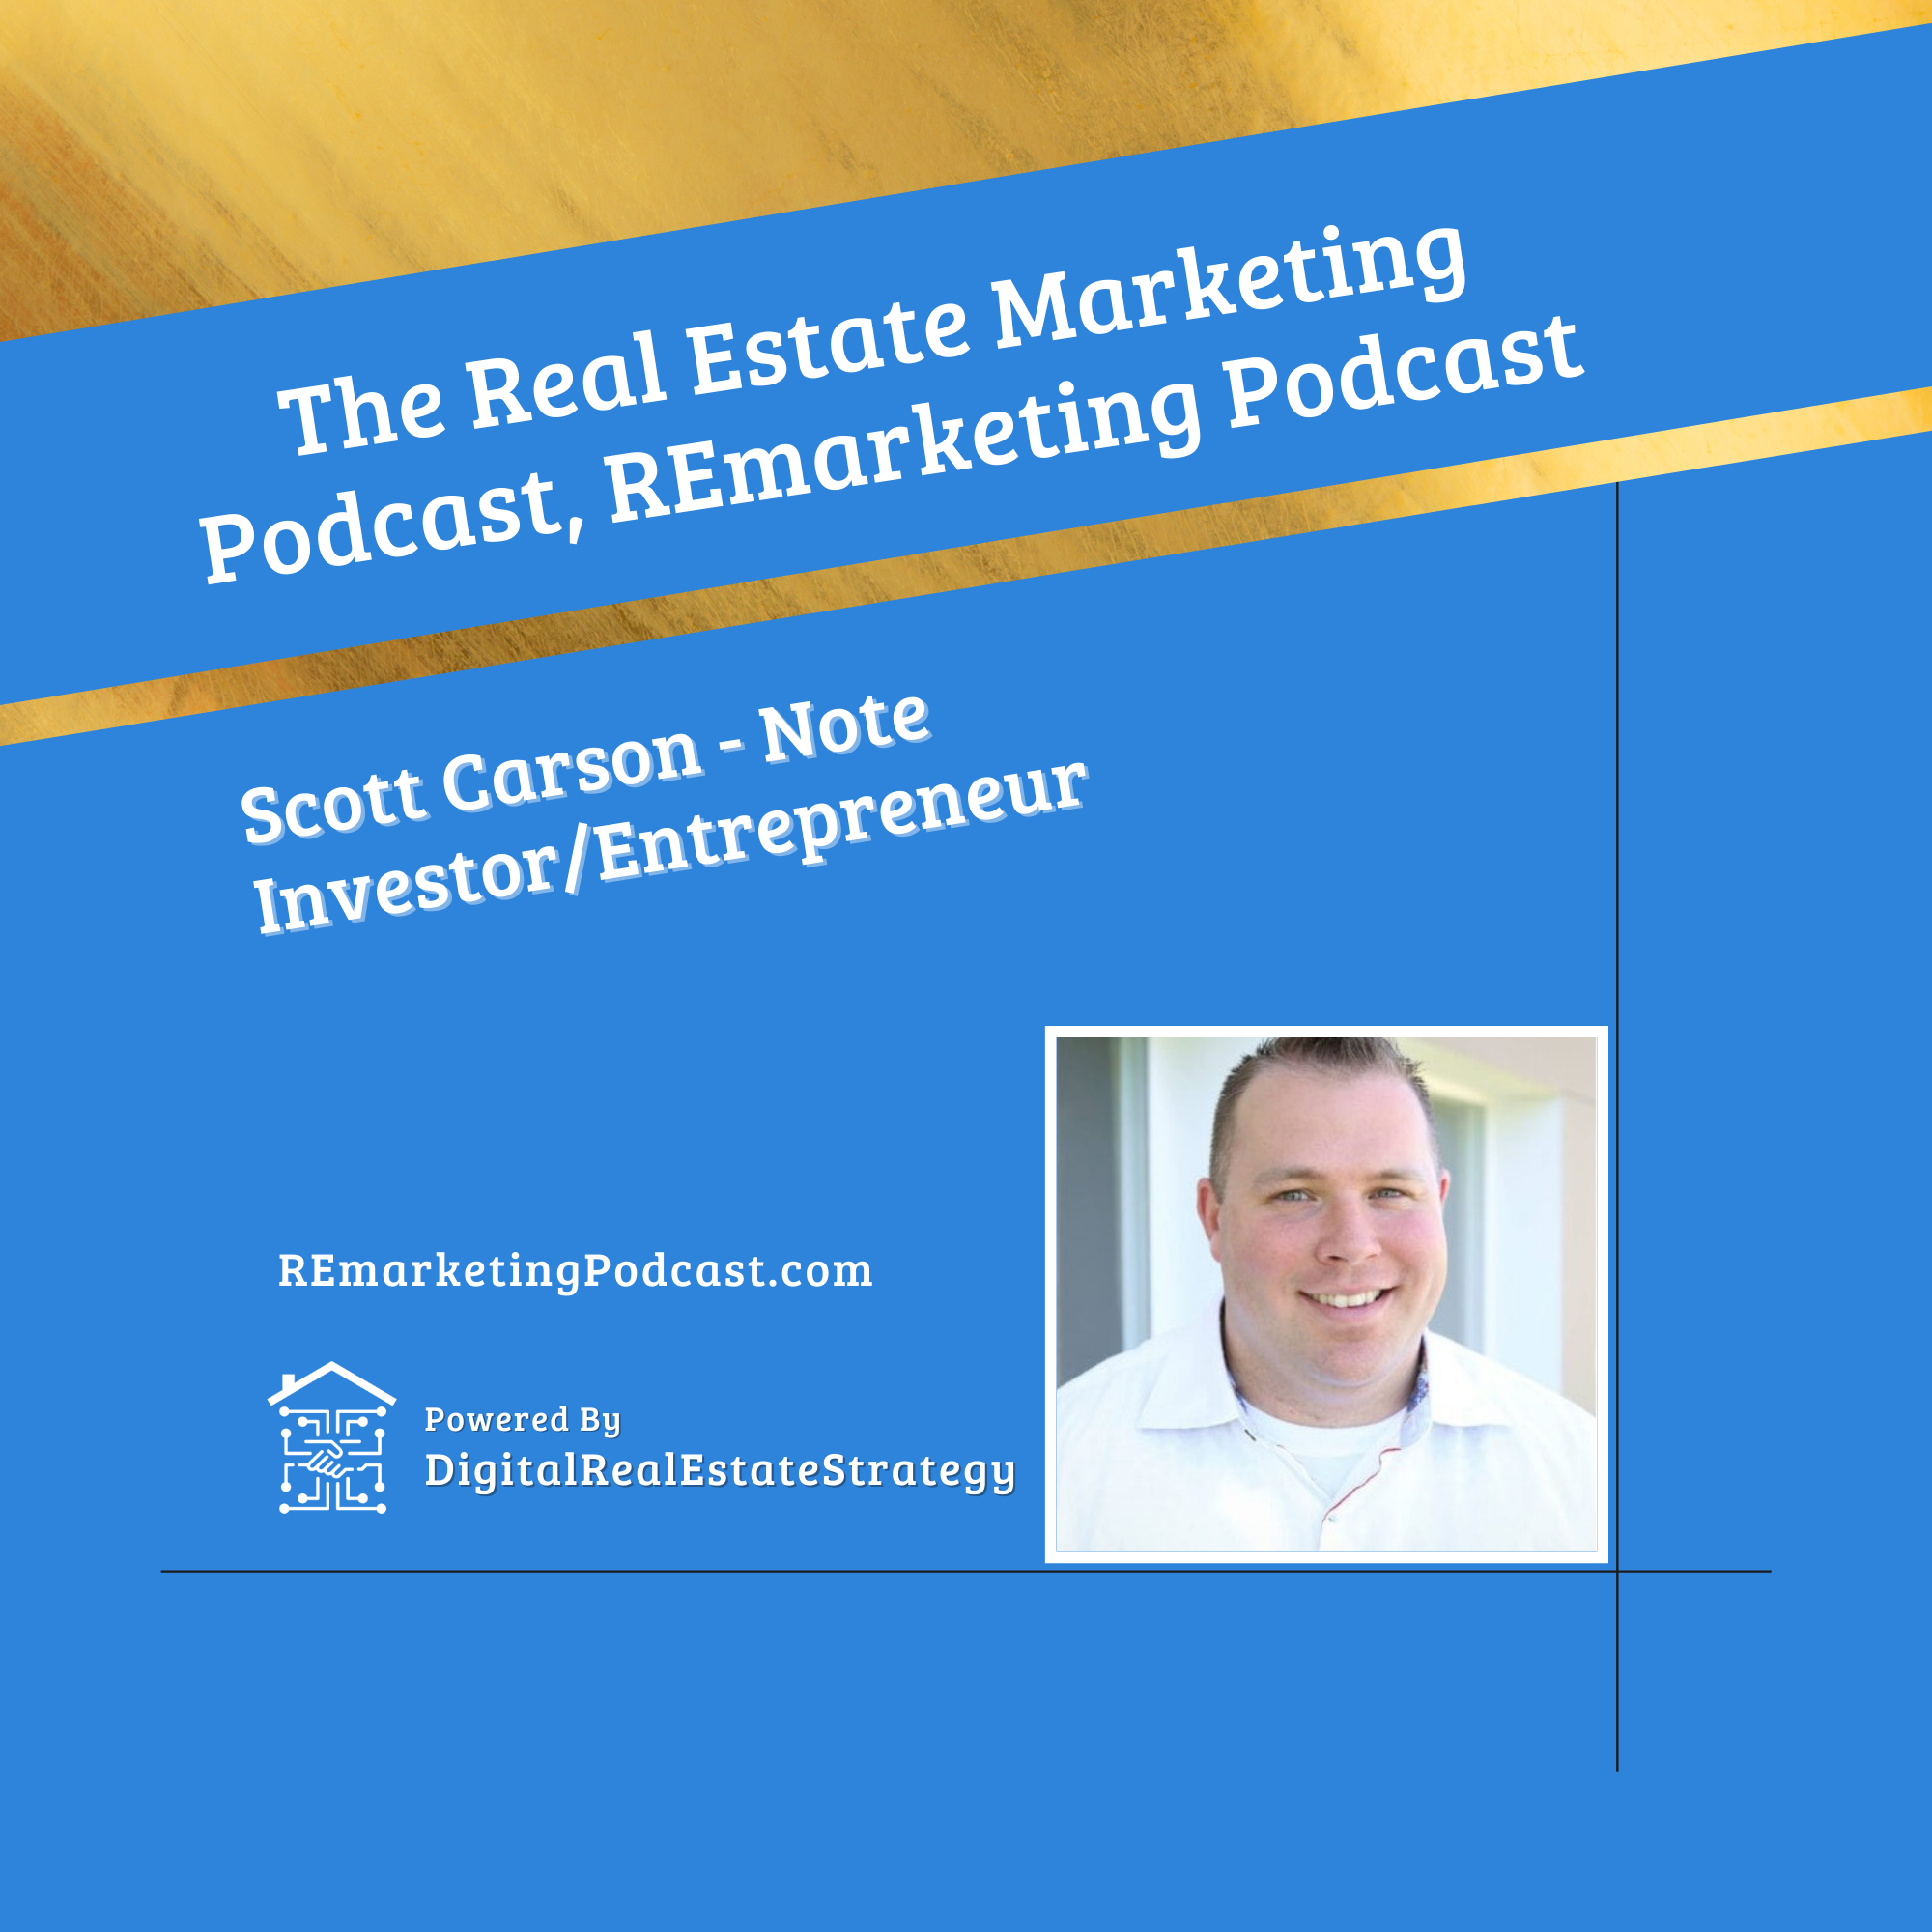 Artwork for podcast The Real Estate Marketing Podcast, REmarketing Podcast